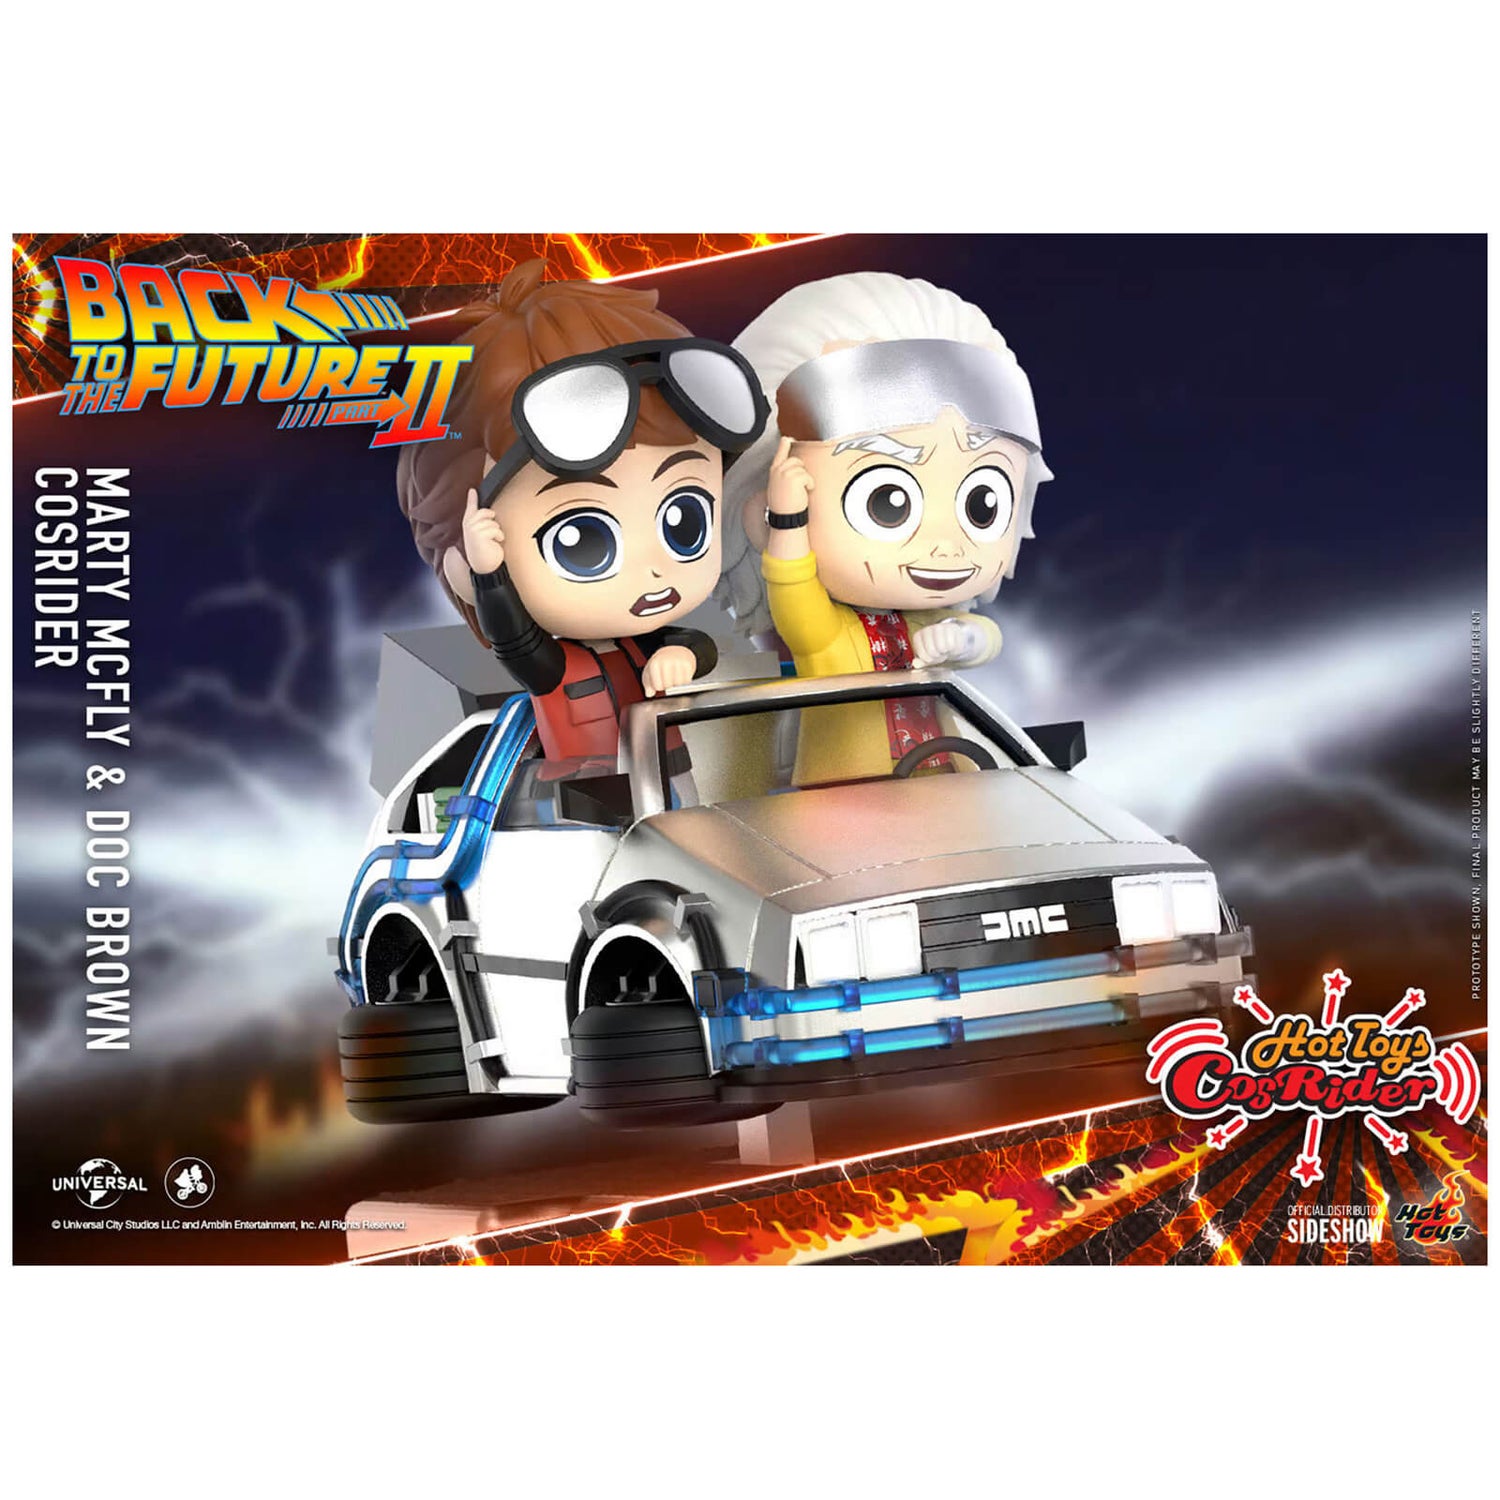 CosRider - Back to the Future - Marty McFly & Doc Brown [Movie / Back to the Future Part II]